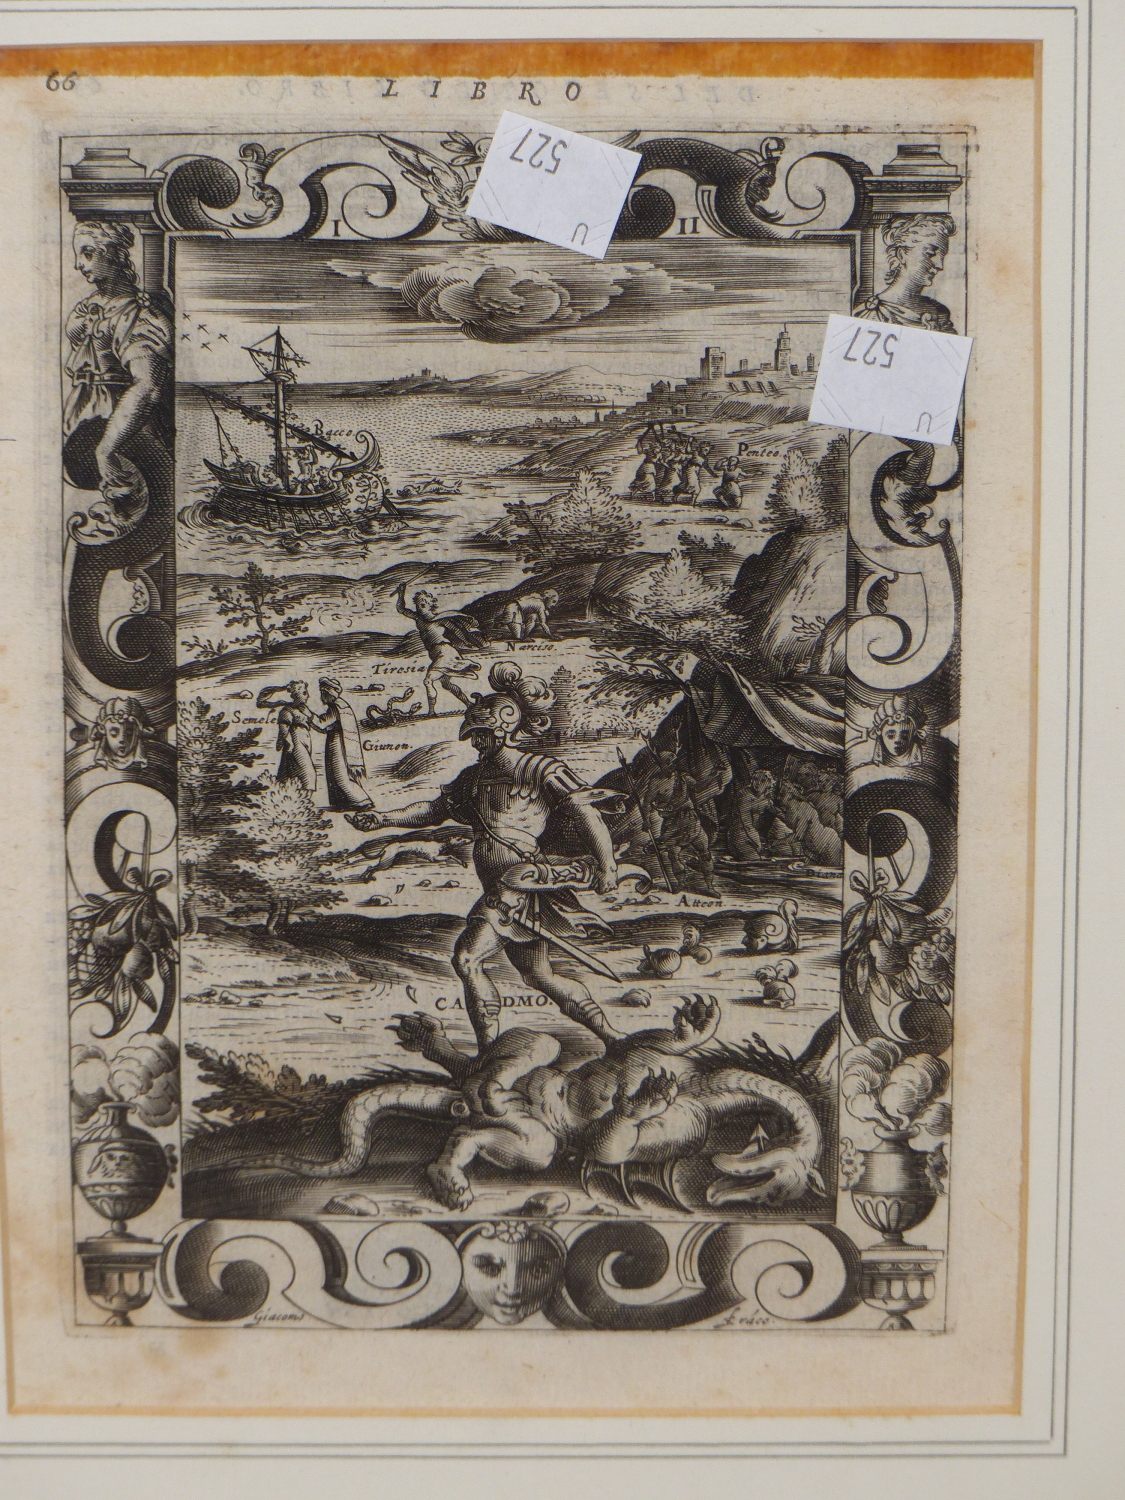 TWO FRAMED ENGRAVED BOOK PLATES DEPICTING JASON AND THE COLCHIS BULLS AND CADMUS SLAYING THE DRAGON, - Image 2 of 4